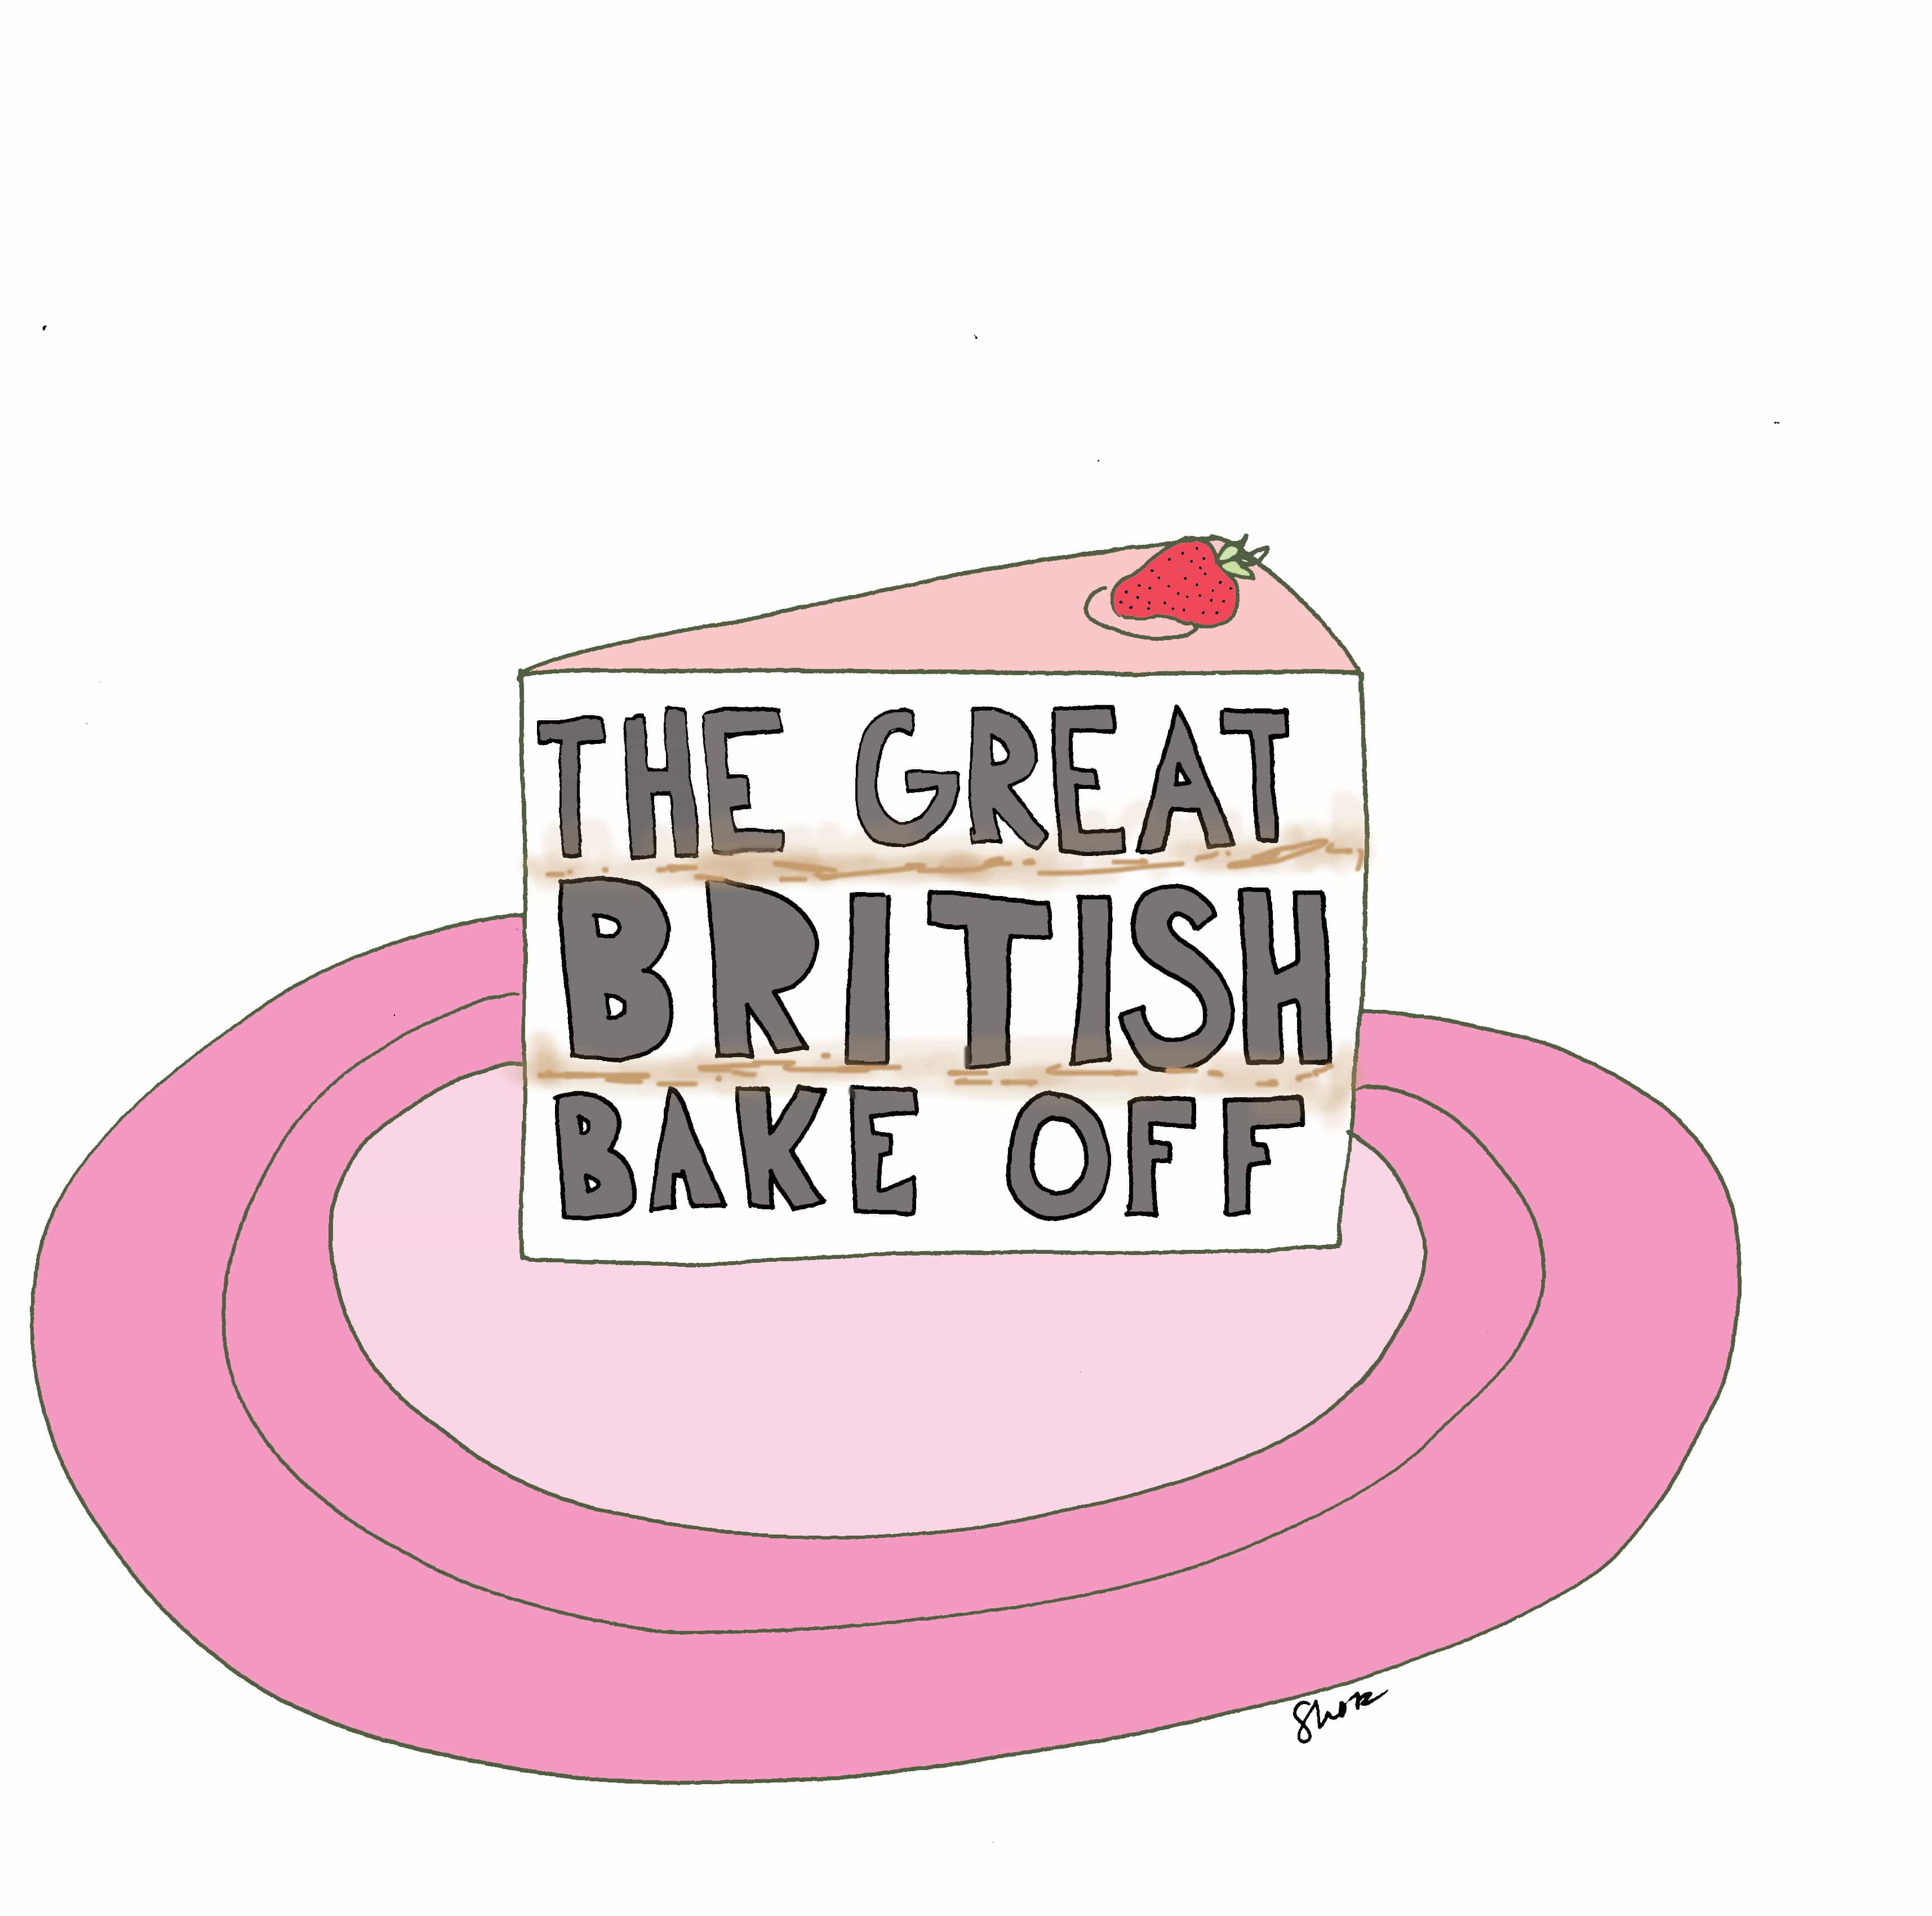 American Reality TV should be more like the Great British Bake Off